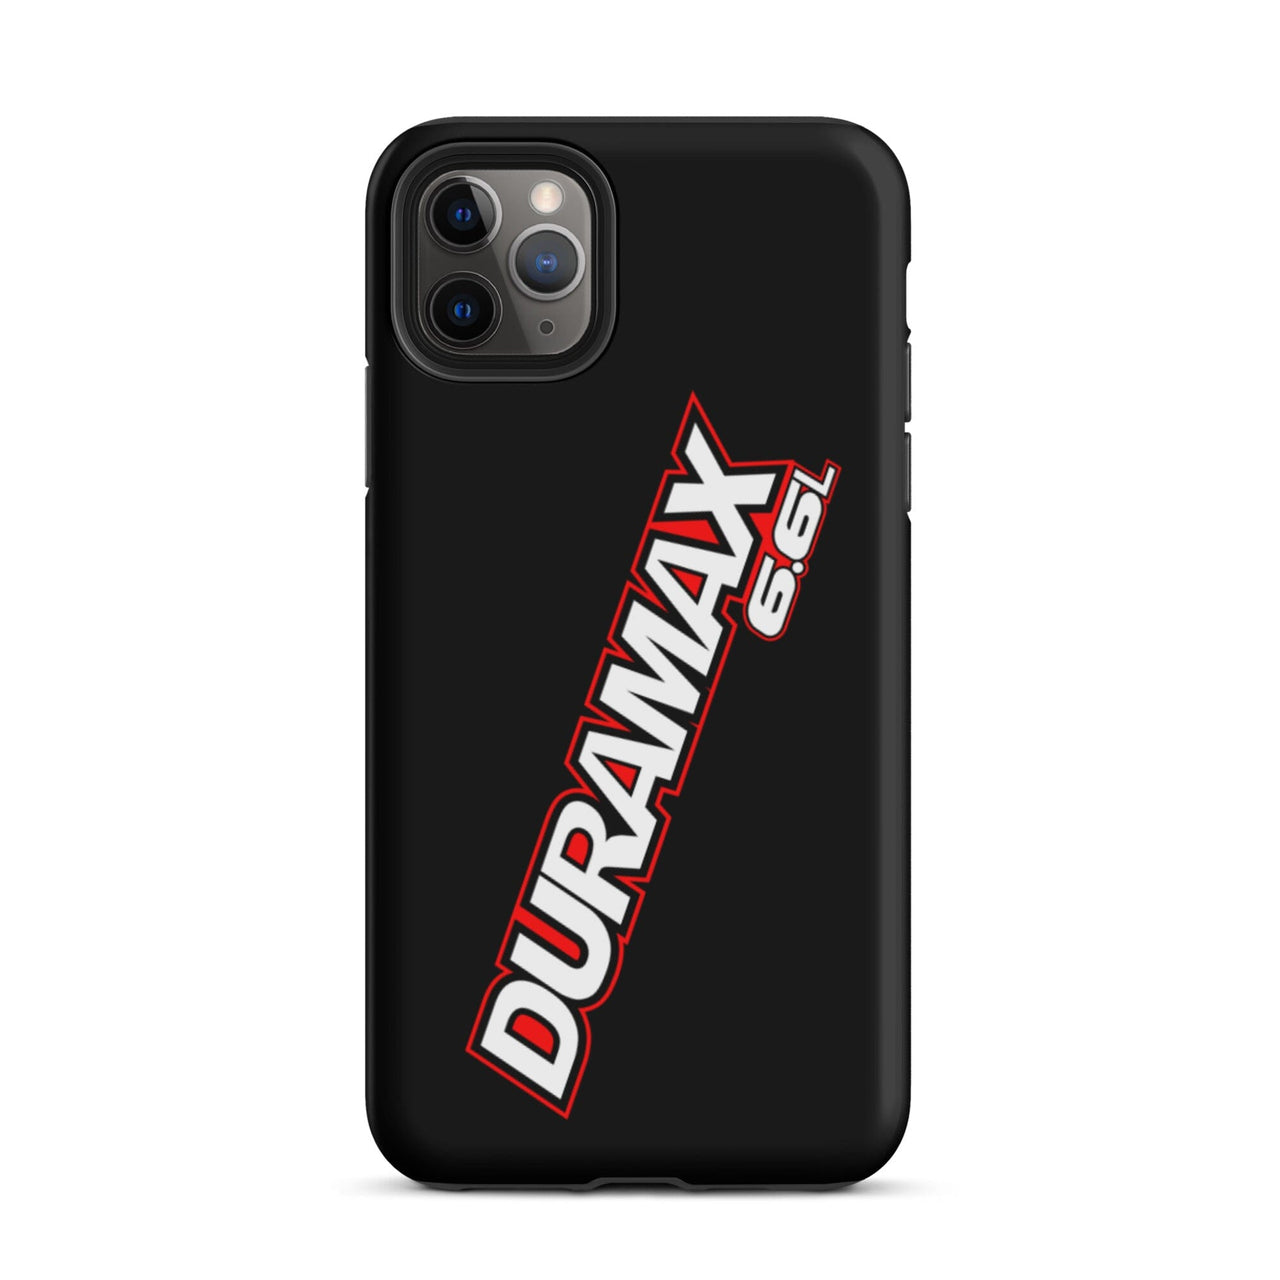 Duramax Phone Case Tough iPhone case-In-iPhone 11 Pro Max-From Aggressive Thread